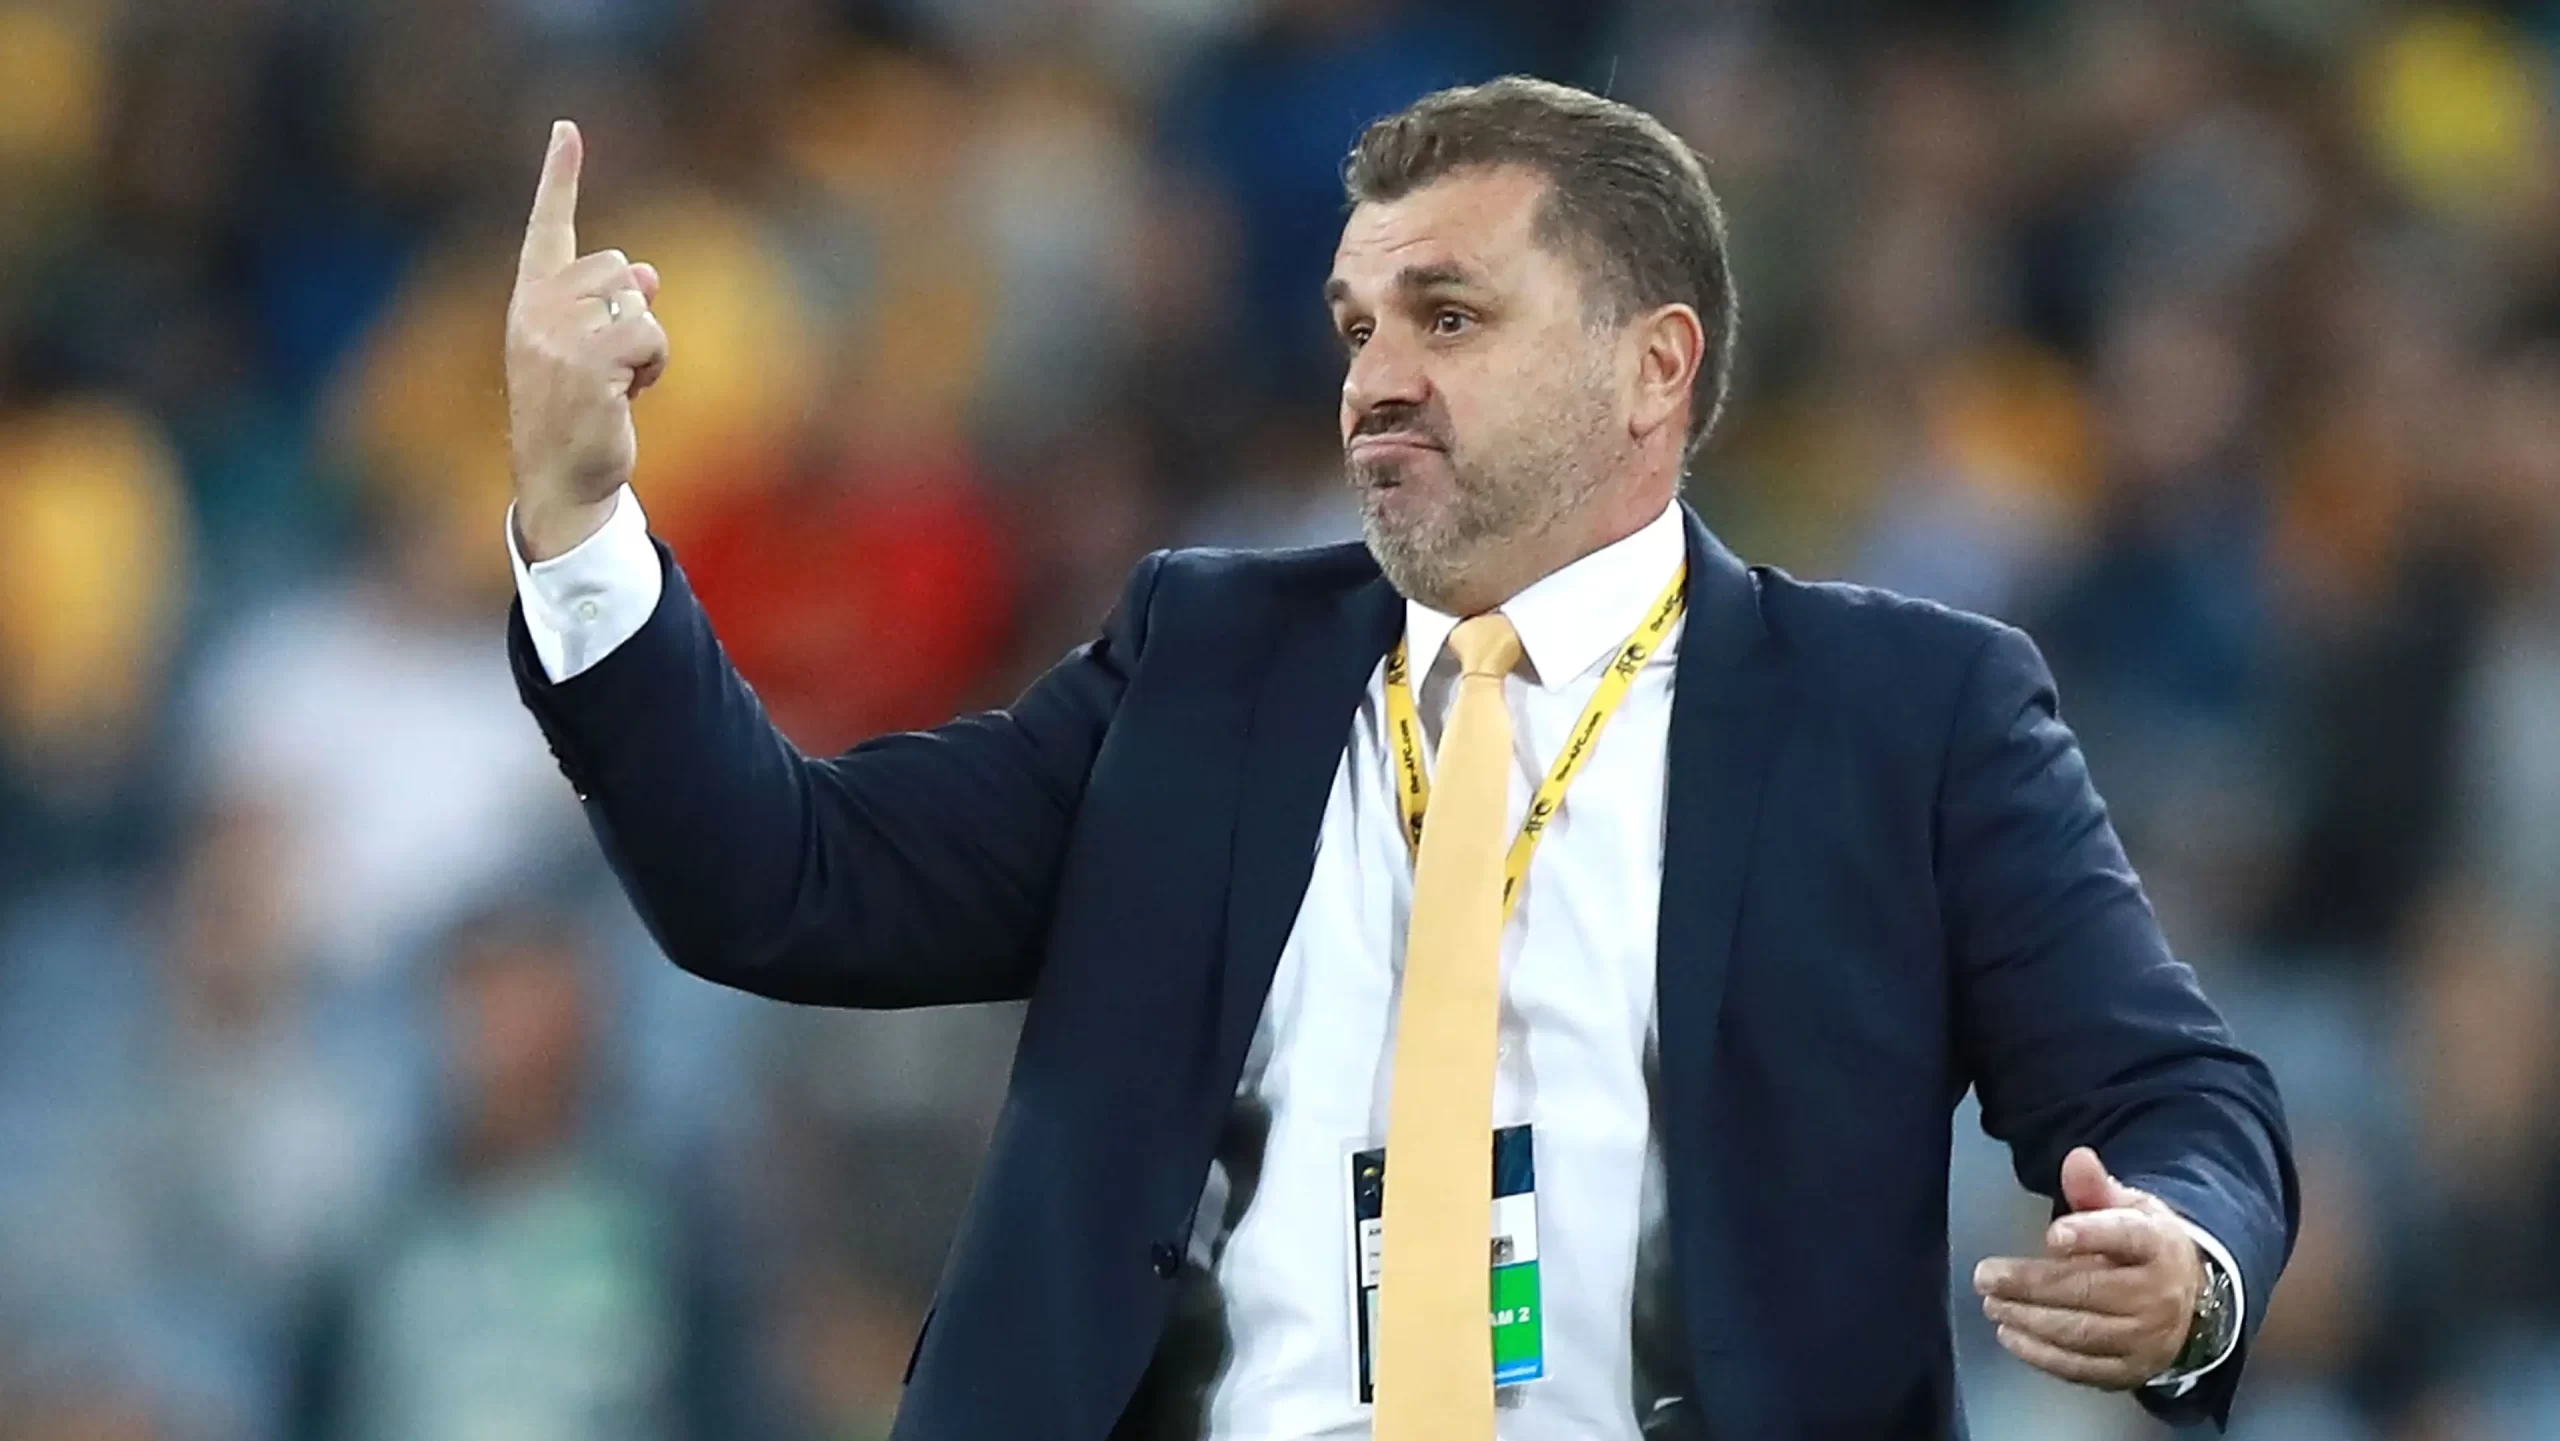 Ange Postecoglou is Really Happy With a Fantastic Player from Tottenham